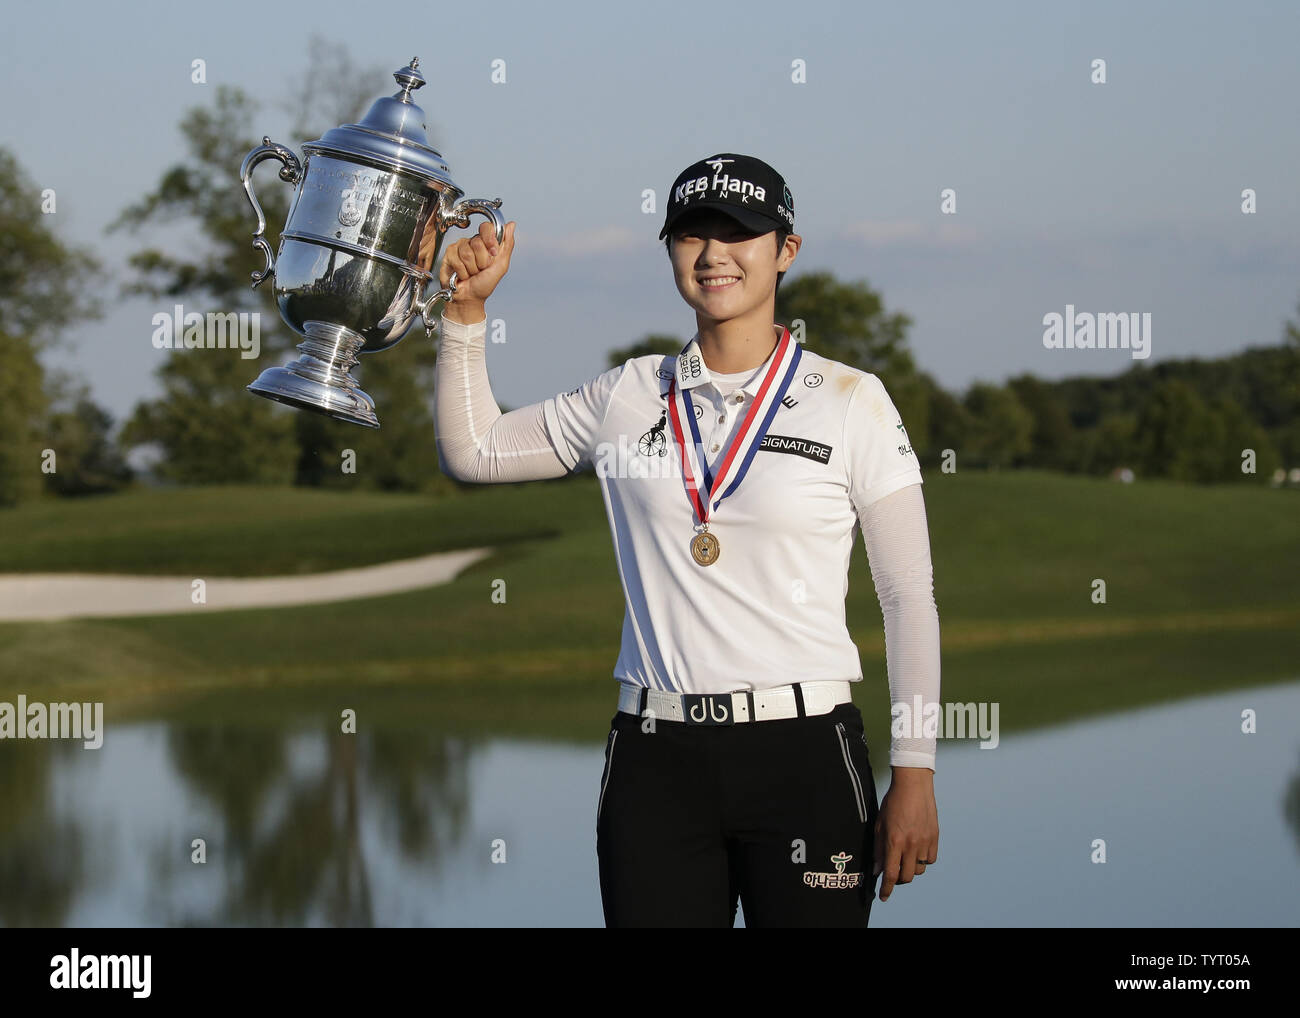 Rookie Sung Hyun Park of South Korea holds the championship trophy at Trump National Golf Club after the final round of the LPGA U.S. Women's Open Championship  in Bedminster, NJ on July 14, 2017. Park wins her first major with a score of 11 under par.      Photo by John Angelillo/UPI Stock Photo